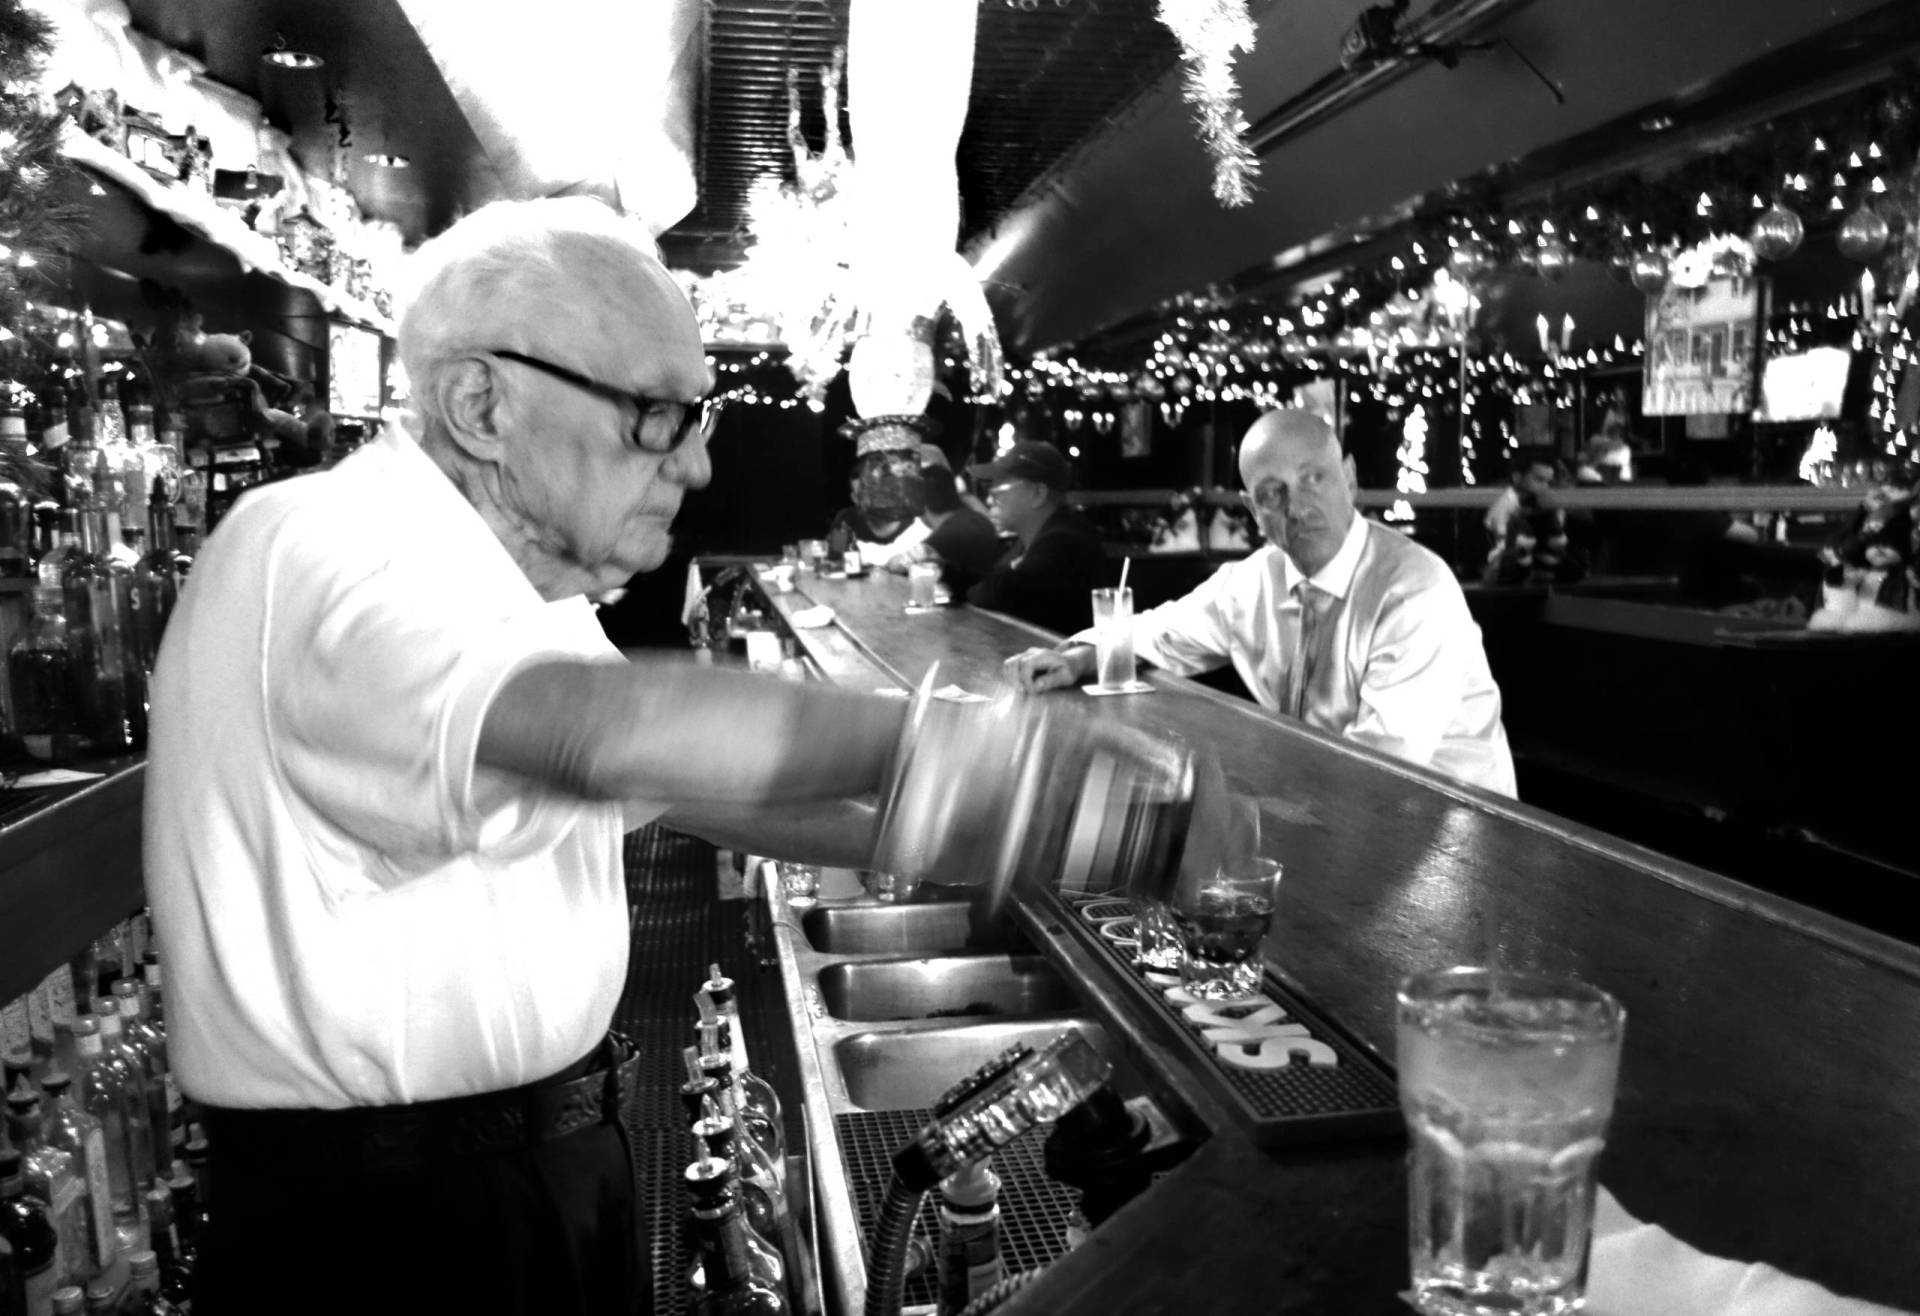 A senior man with white hair and receding hairline pours a drink from behind a small, old-fashioned bar. He is wearing a white short-sleeved shirt and black pants. The bar is full of Christmas lights and lined with mirrors. There are three or four patrons seated at the bar.